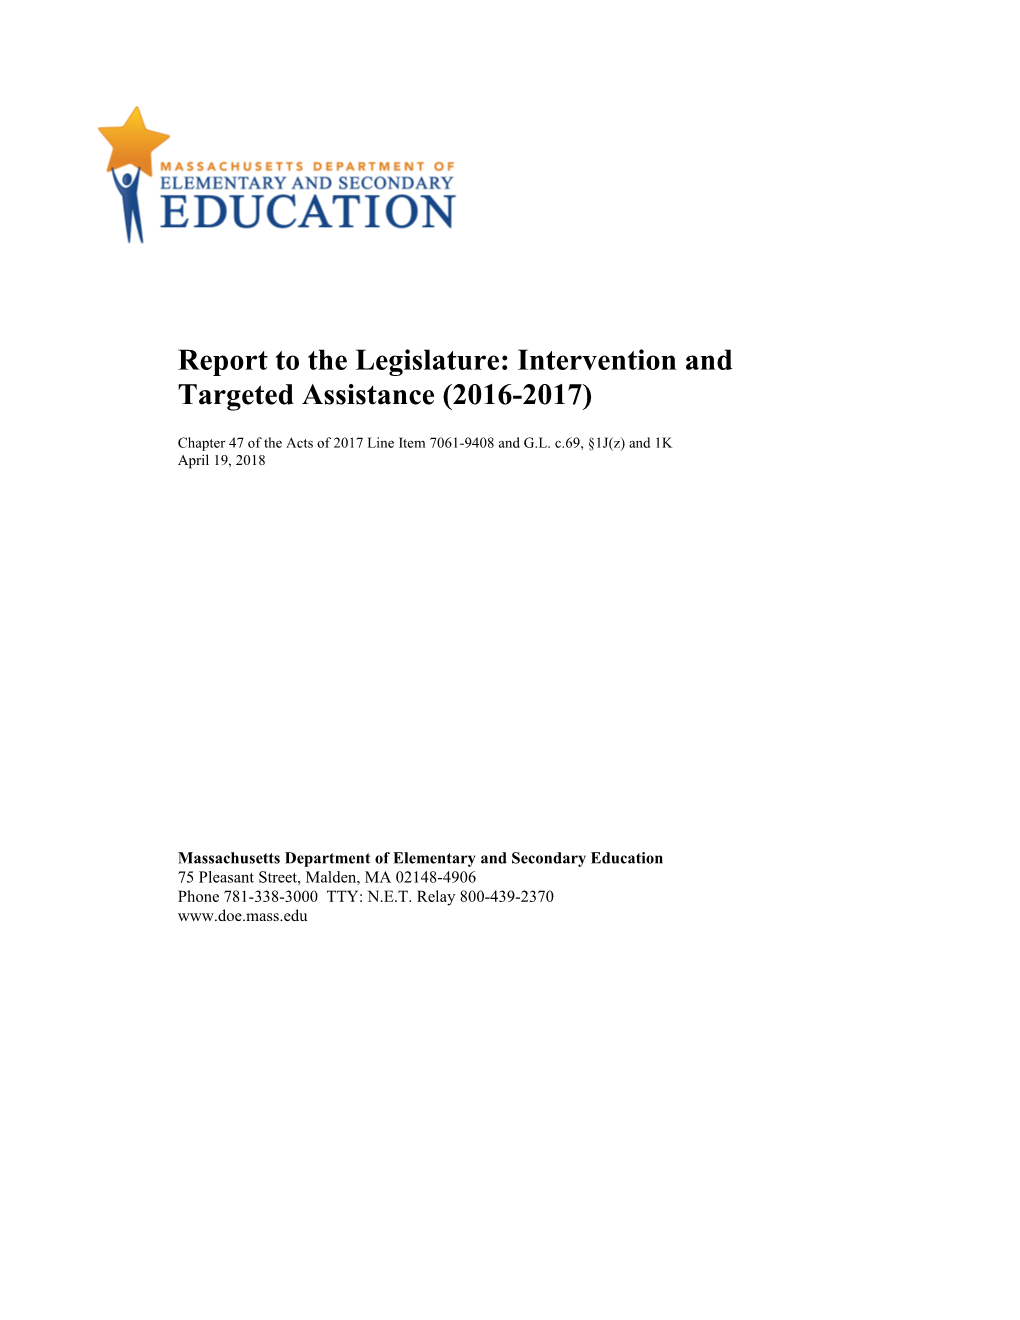 Report to the Legislature: Intervention and Targeted Assistance (2016-2017)